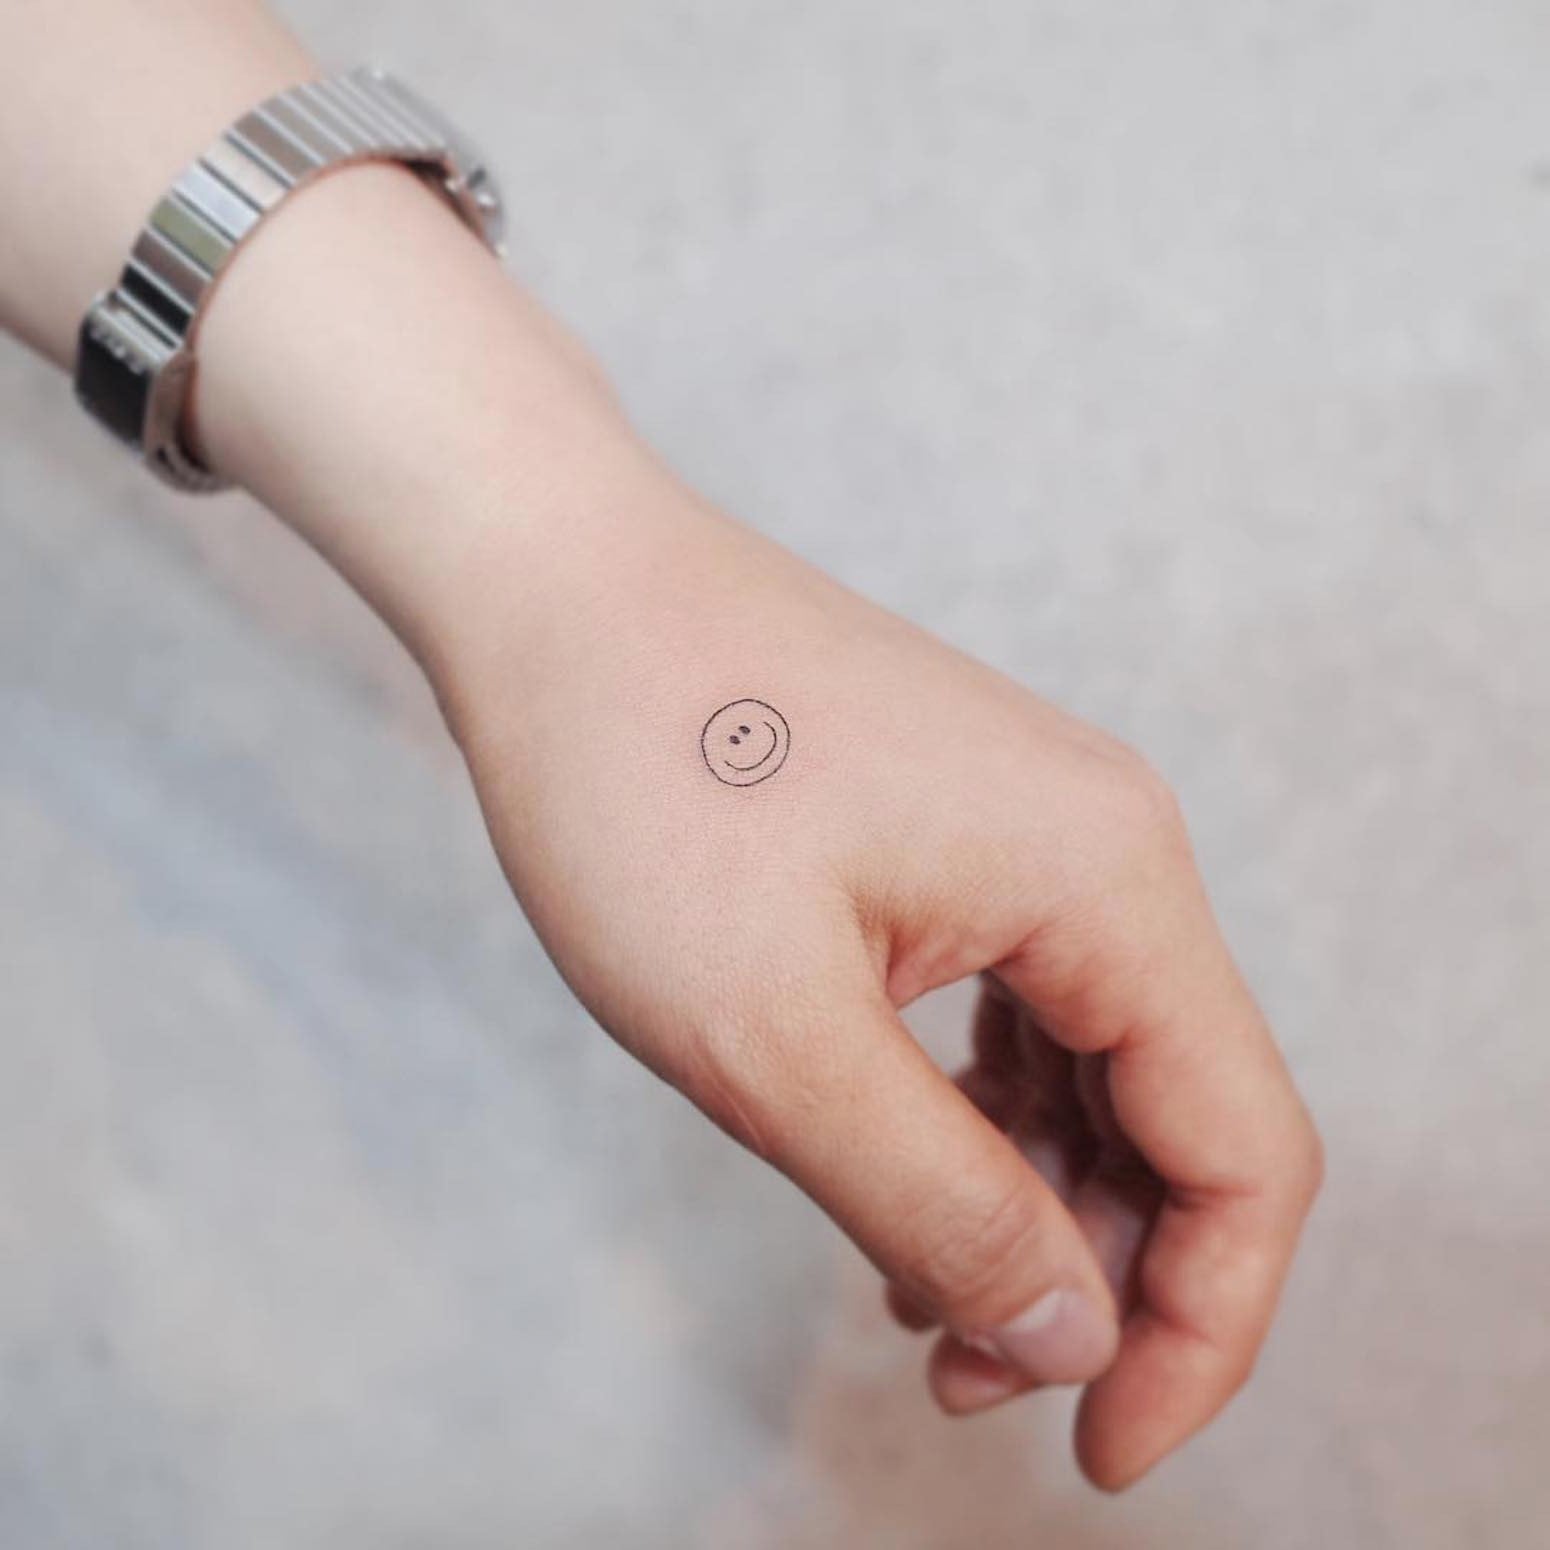 Glyph tattoo meaning Create Harmony and Happiness   Inkt